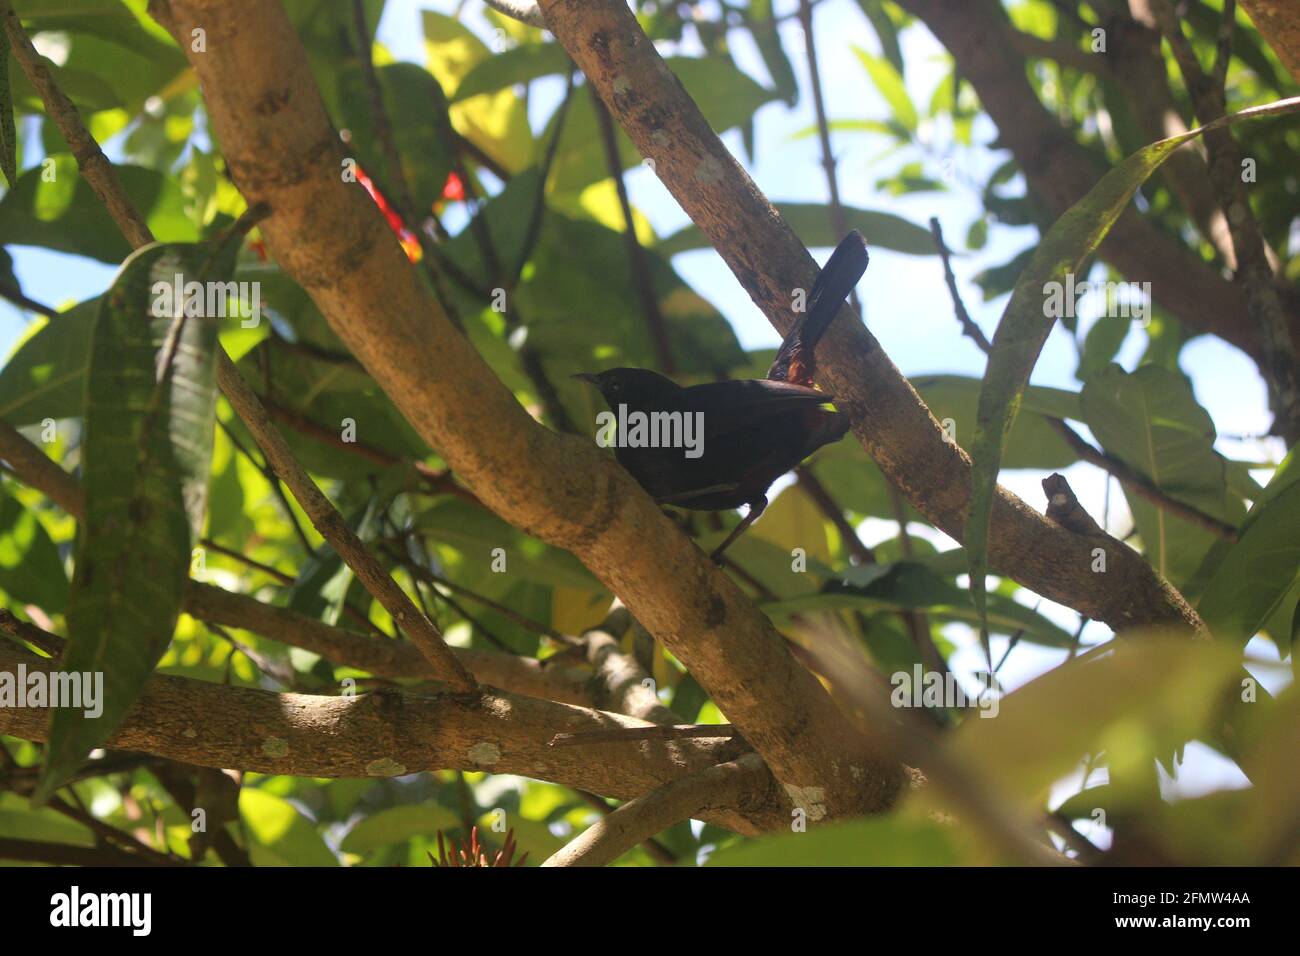 Black color tiny bird on a branch with blurry background Stock Photo